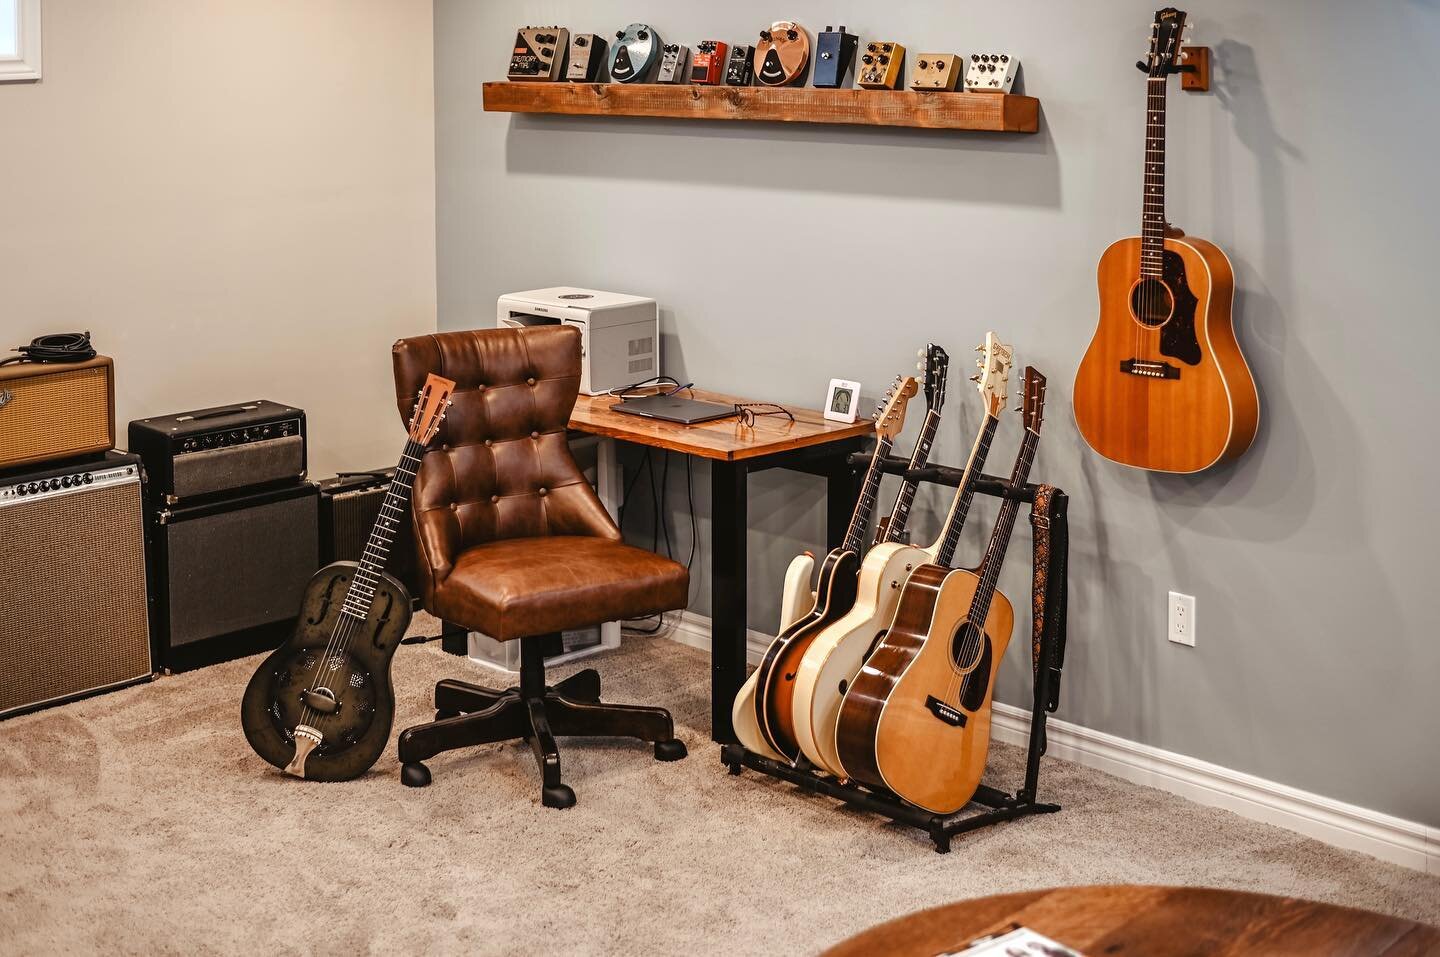 The studio is all clean and ready for lessons today! I can&rsquo;t wait to start rockin&rsquo; out in the same again🤘🎸😷 #wilmot #wilmotstrongertogether #kwawesome #guitarlessonsforkids #guitarlessonsforadults #guitarinstruction